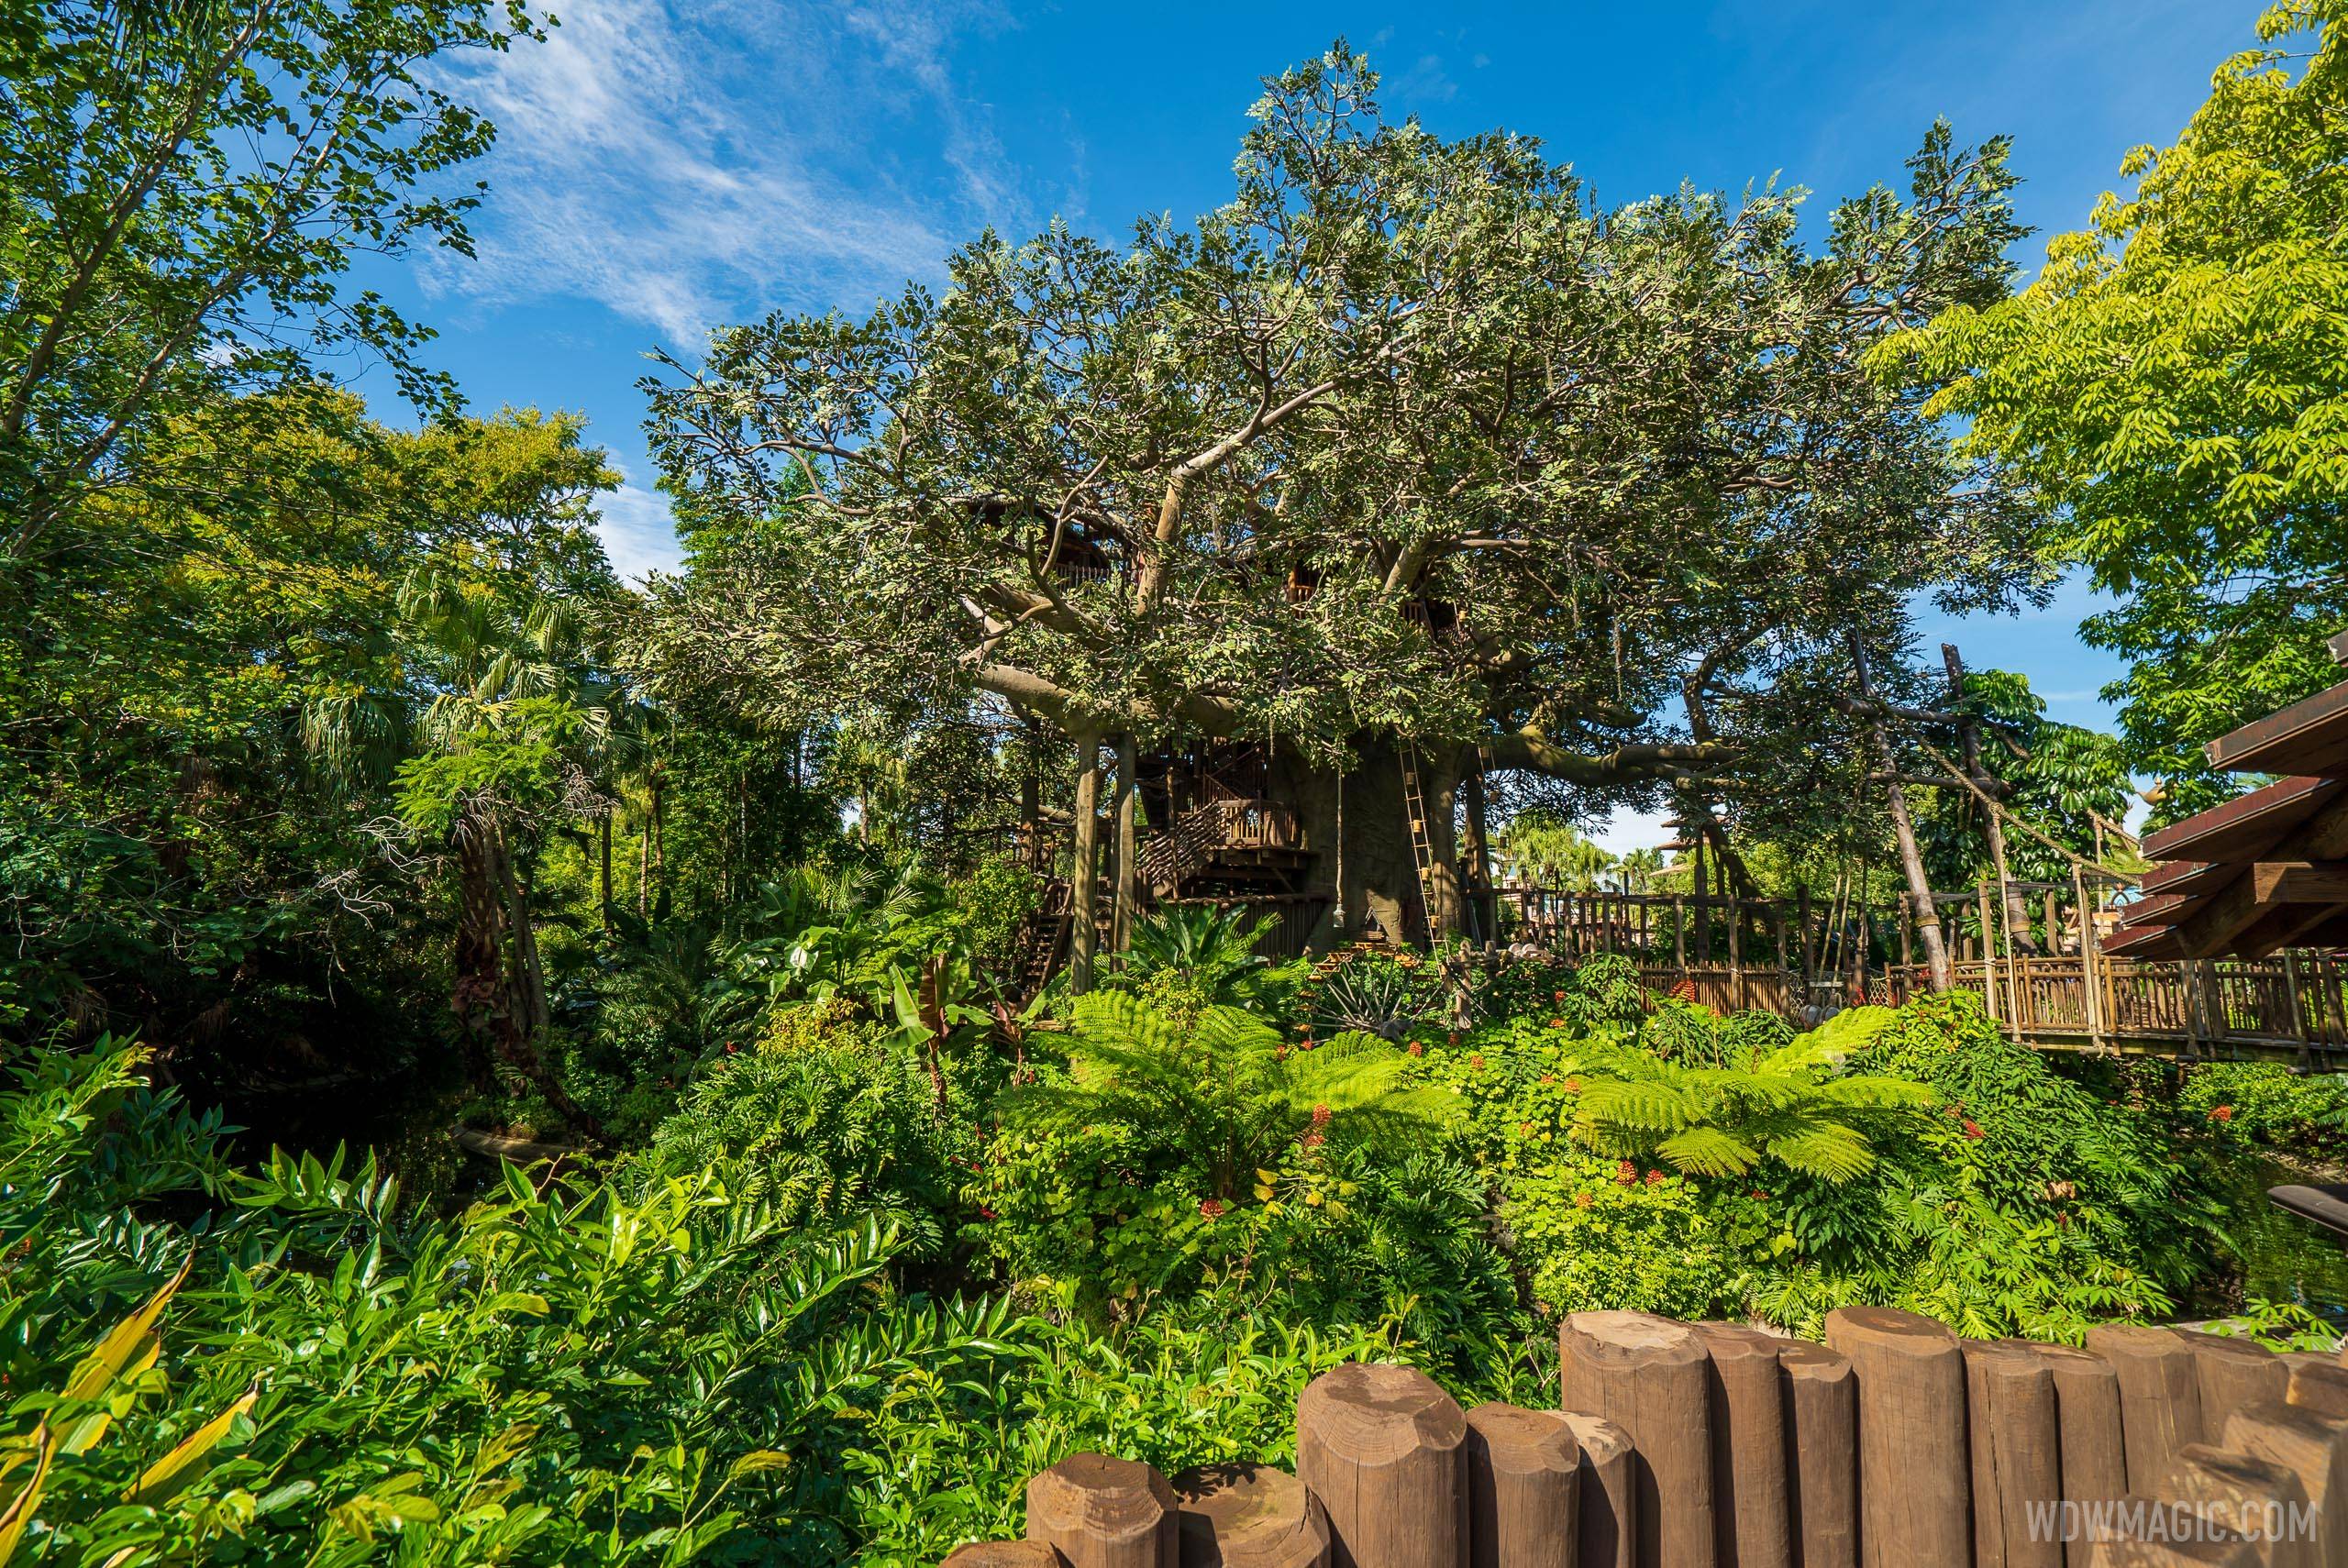 Swiss Family Treehouse refurbishment extended by a few days